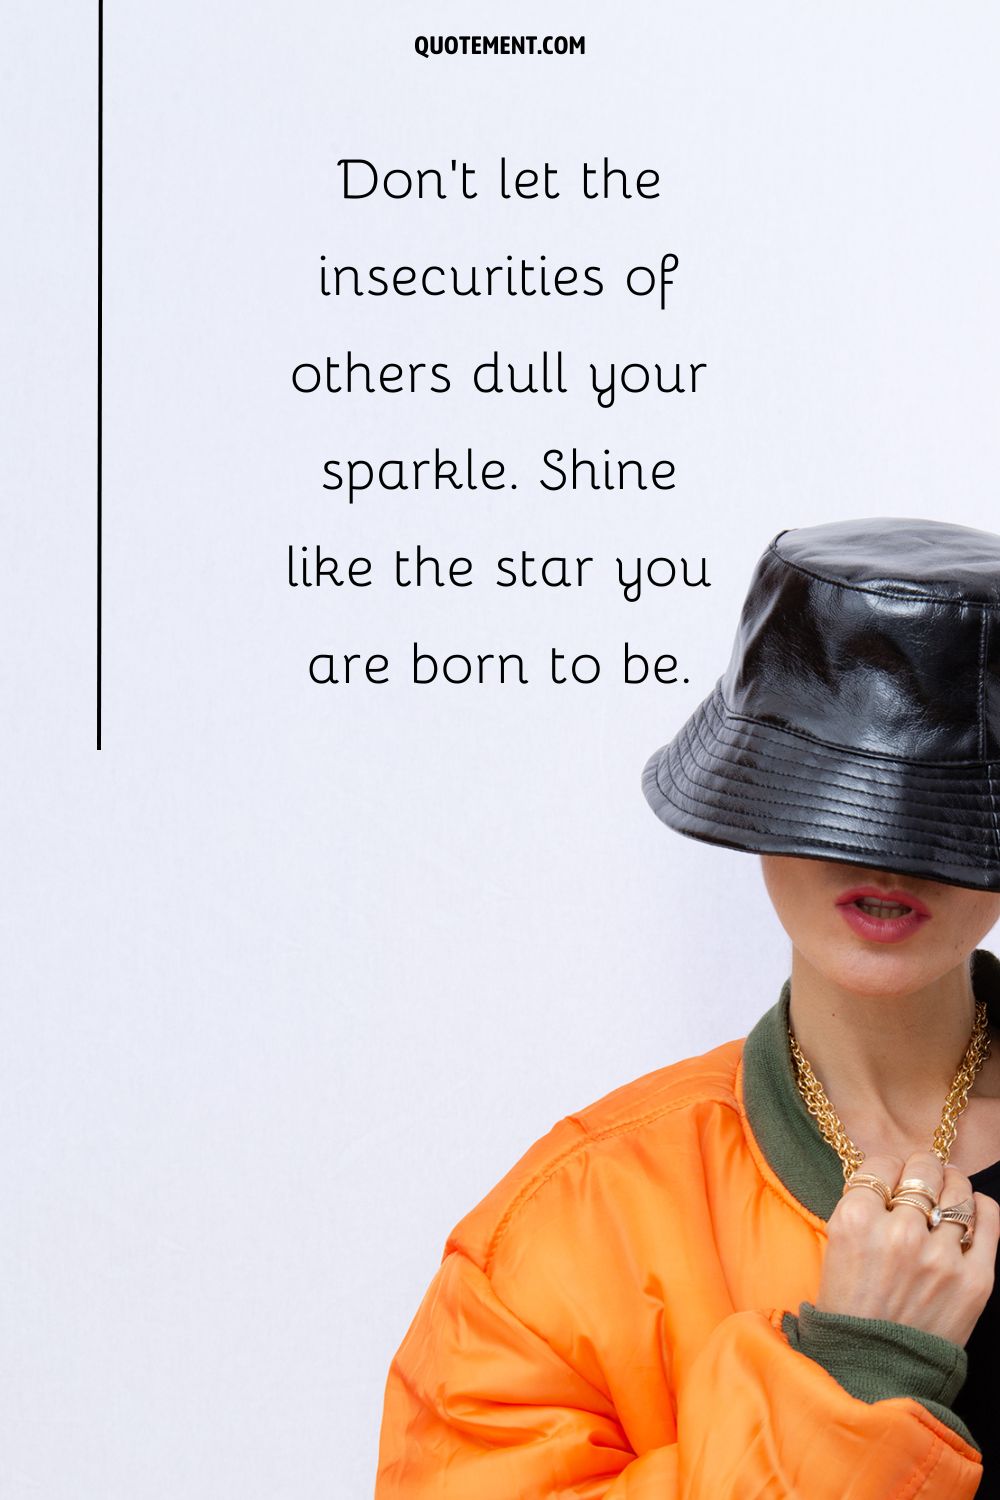 a girl wearing an orange jacket and a black hat representing top attitude captio